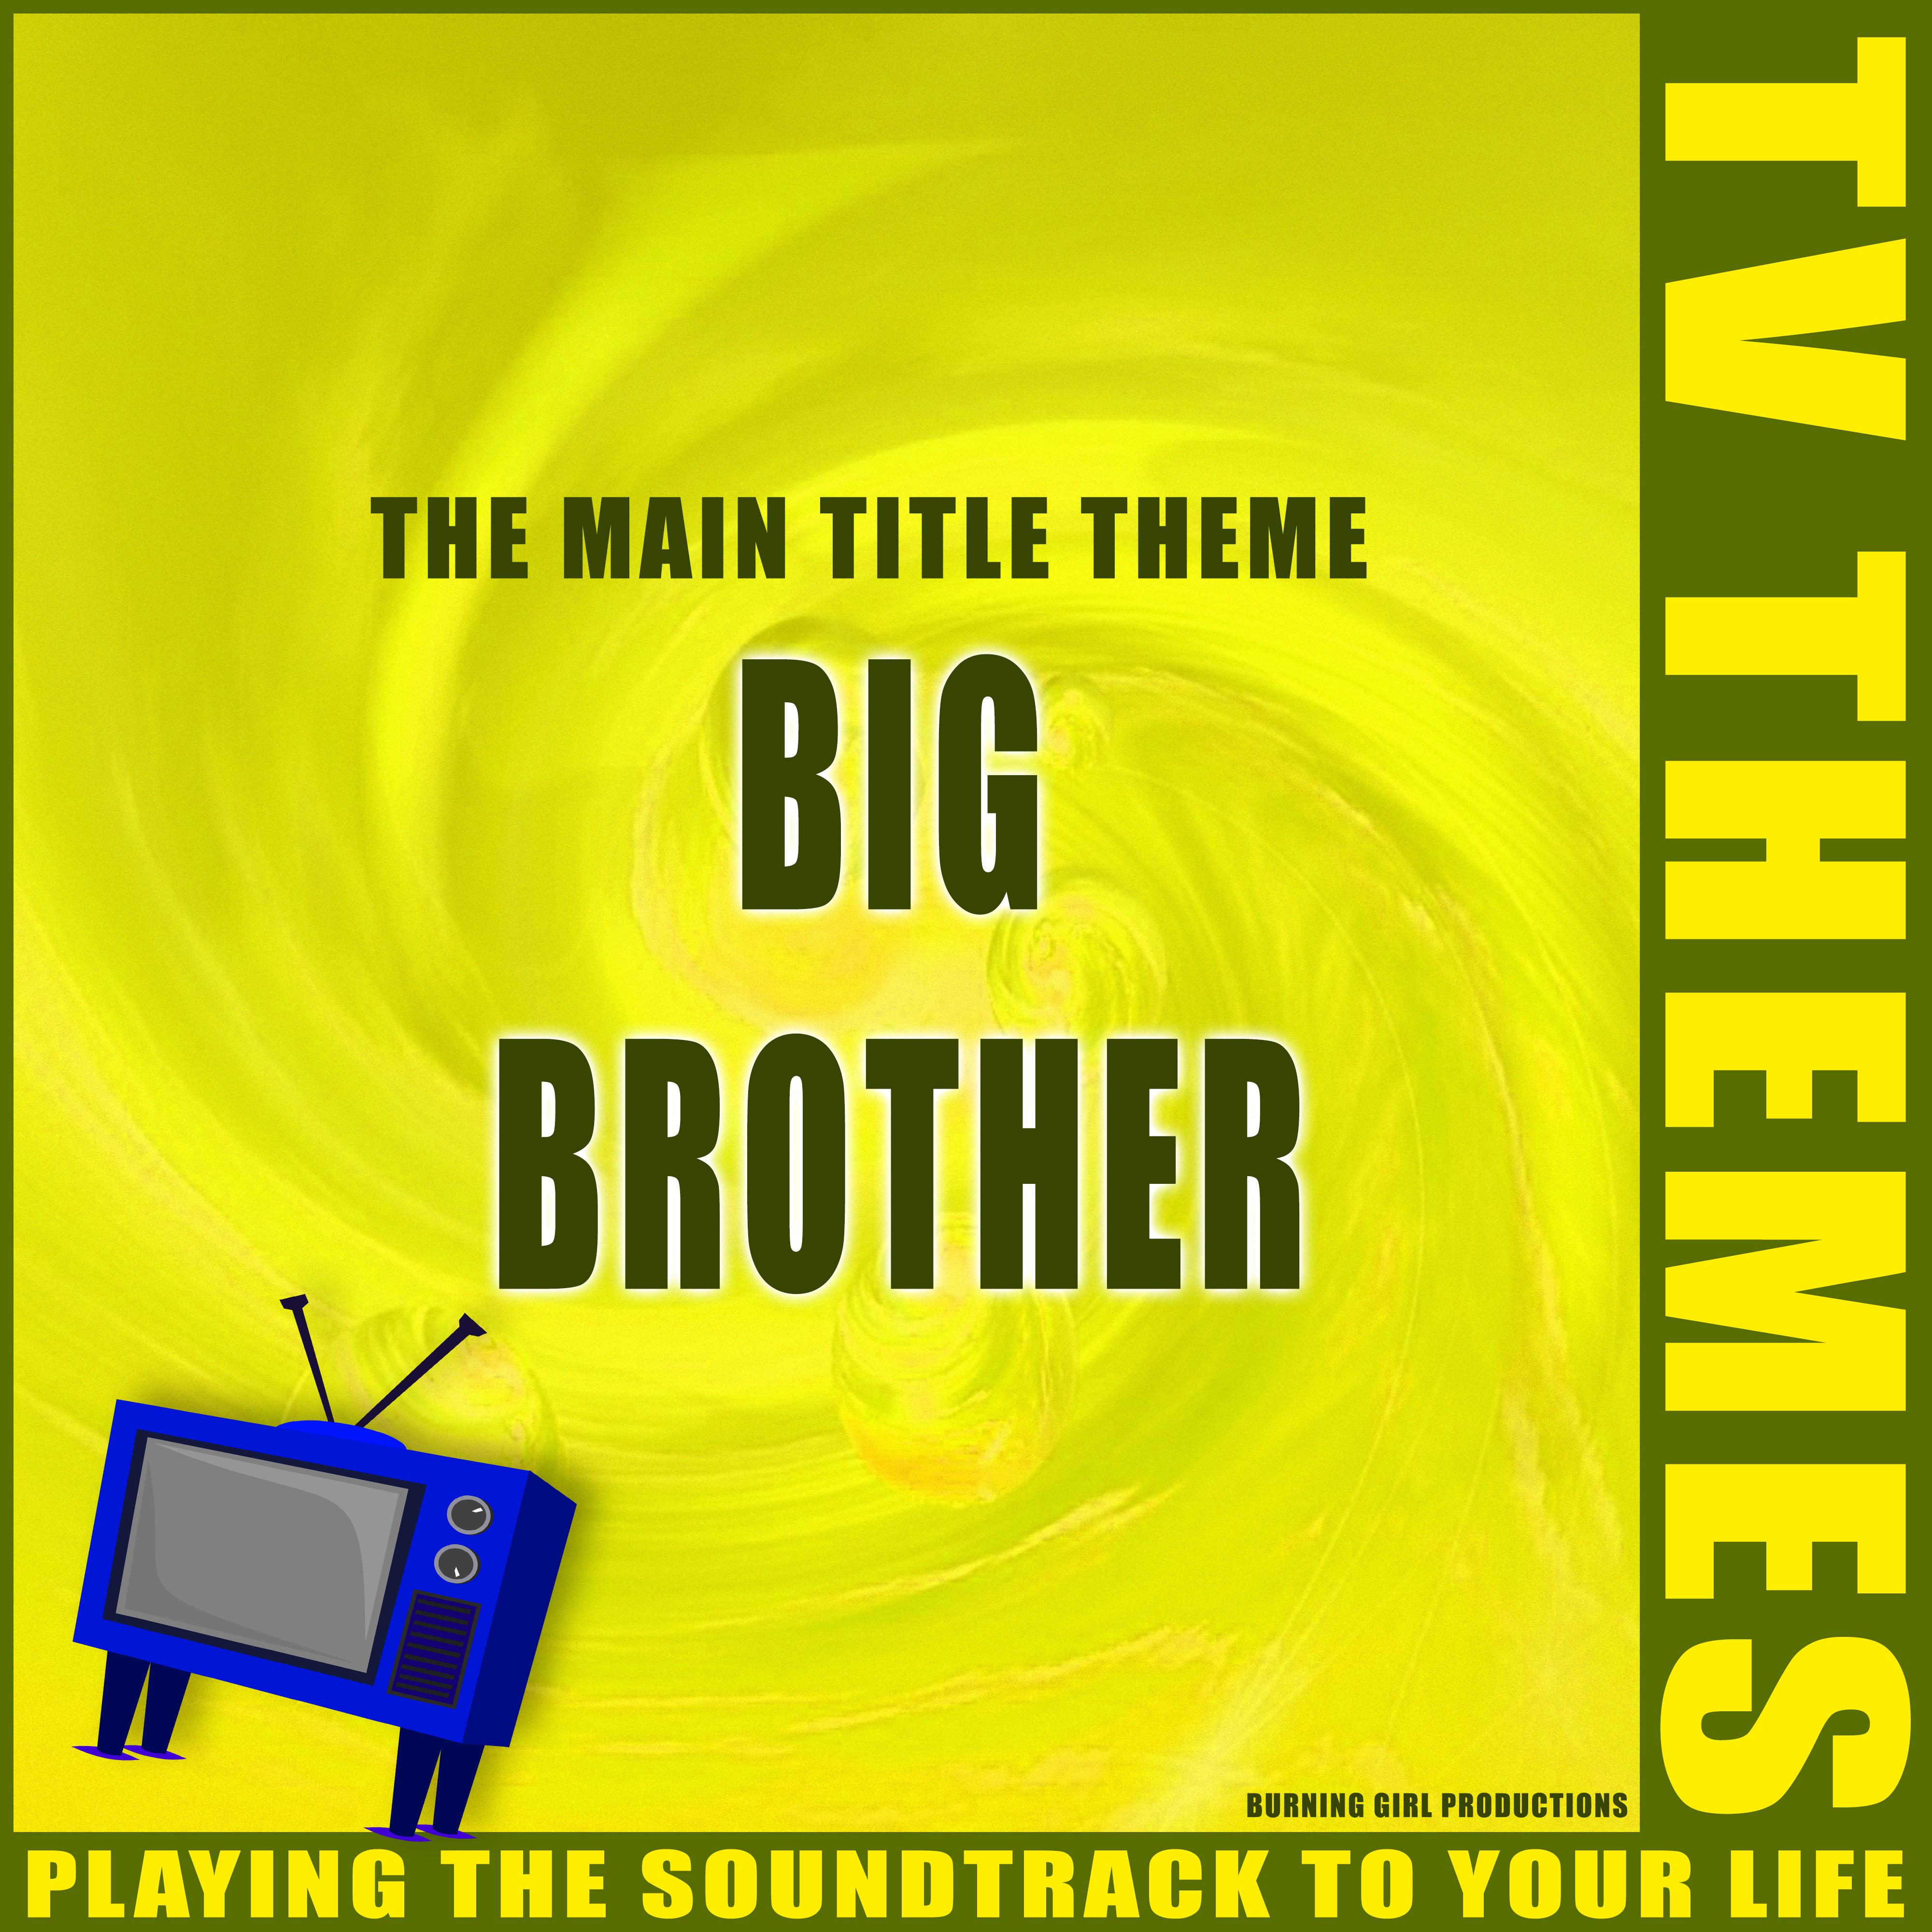 The Main Title Theme - Big Brother